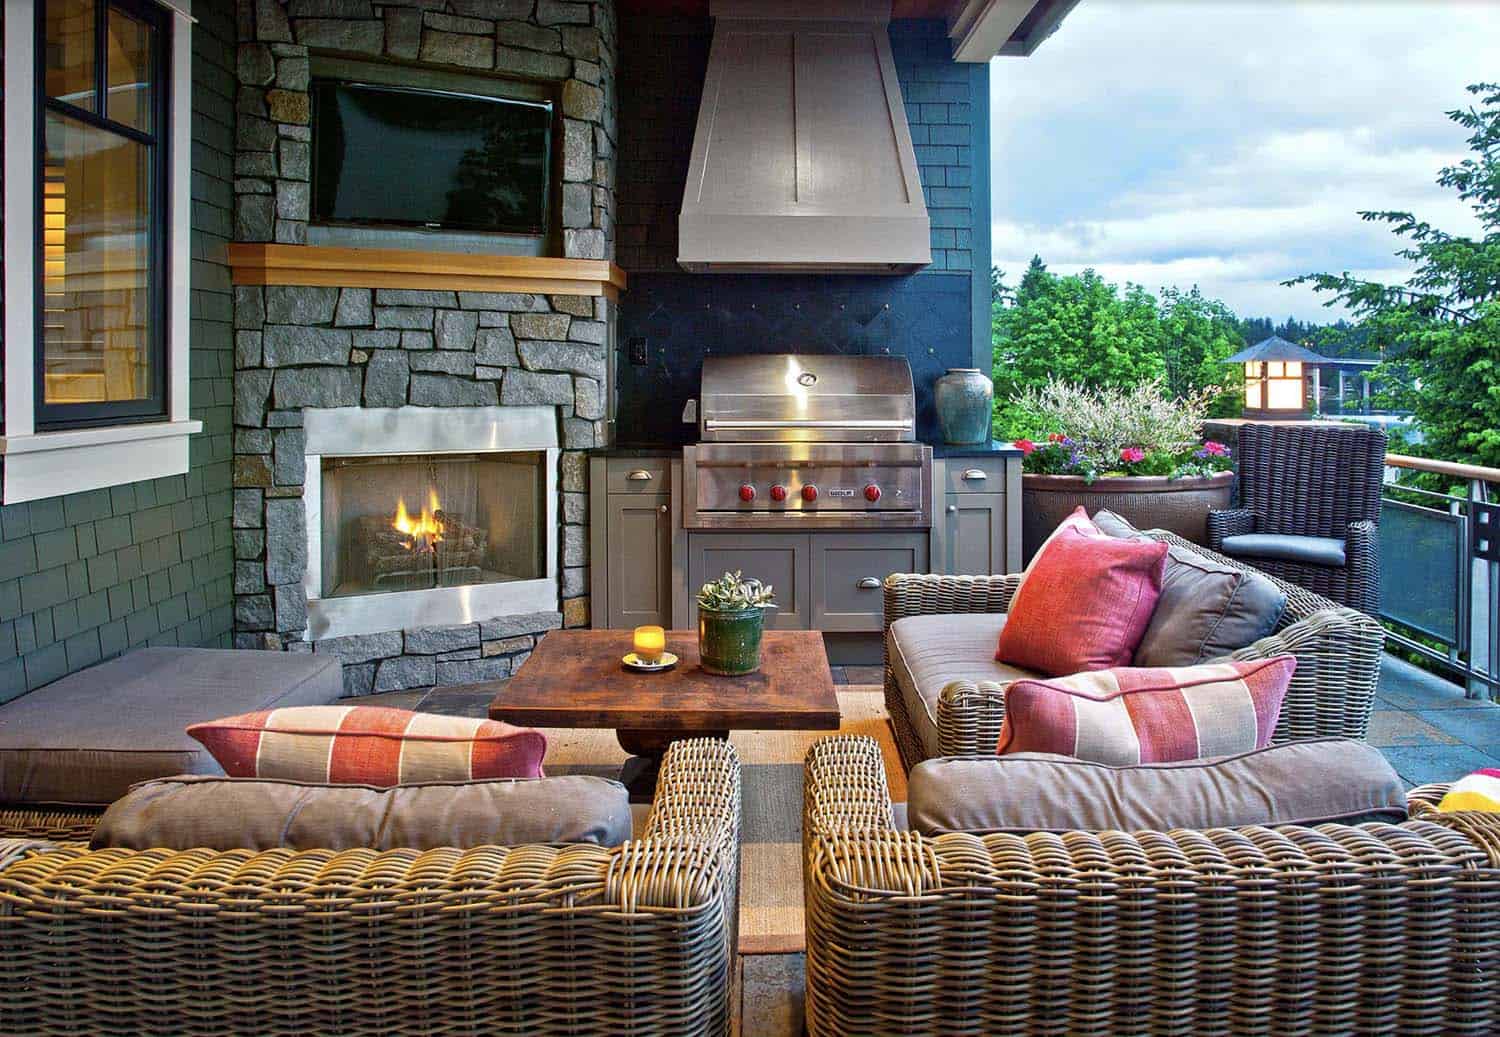 outdoor deck with a fireplace and grilling station